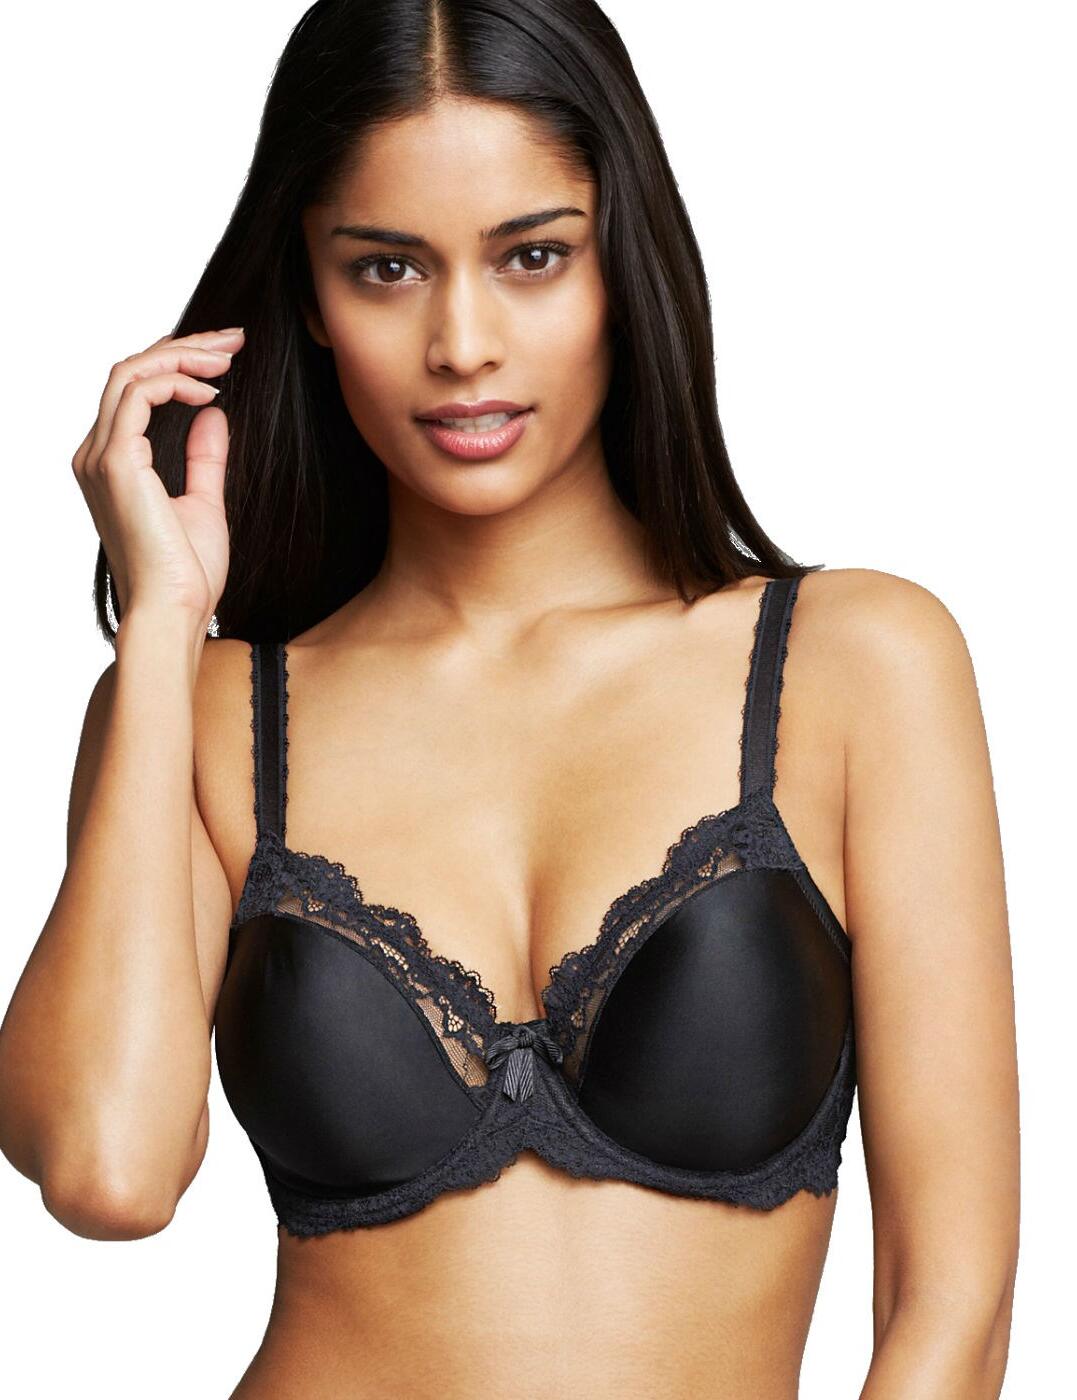 855203 Wacoal Supporting Role Full Cup Bra - 855203 Black